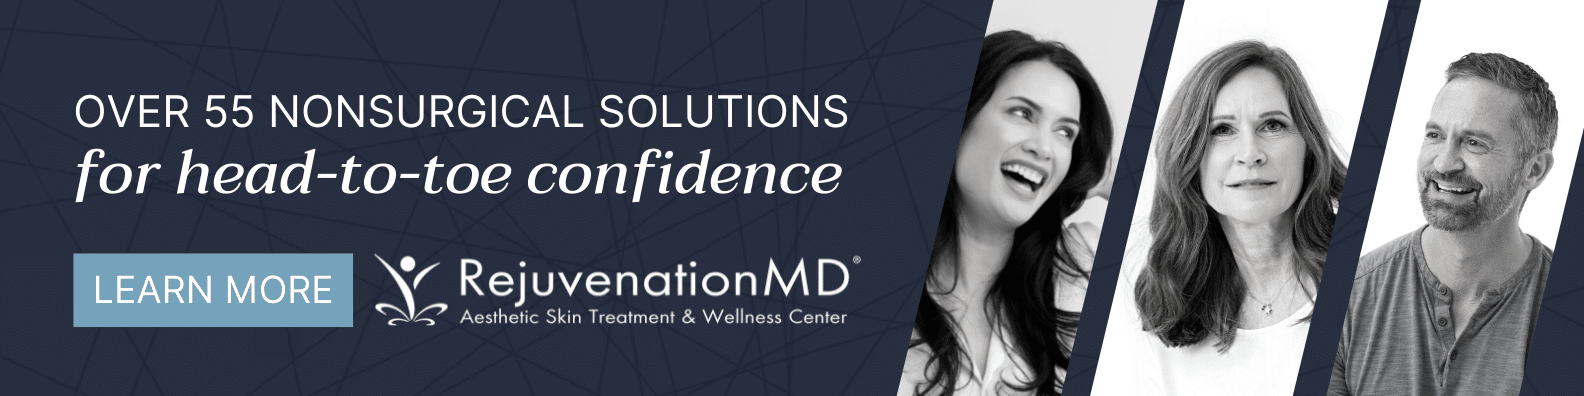 Over 55 aesthetic treatments and services at RejuvenationMD